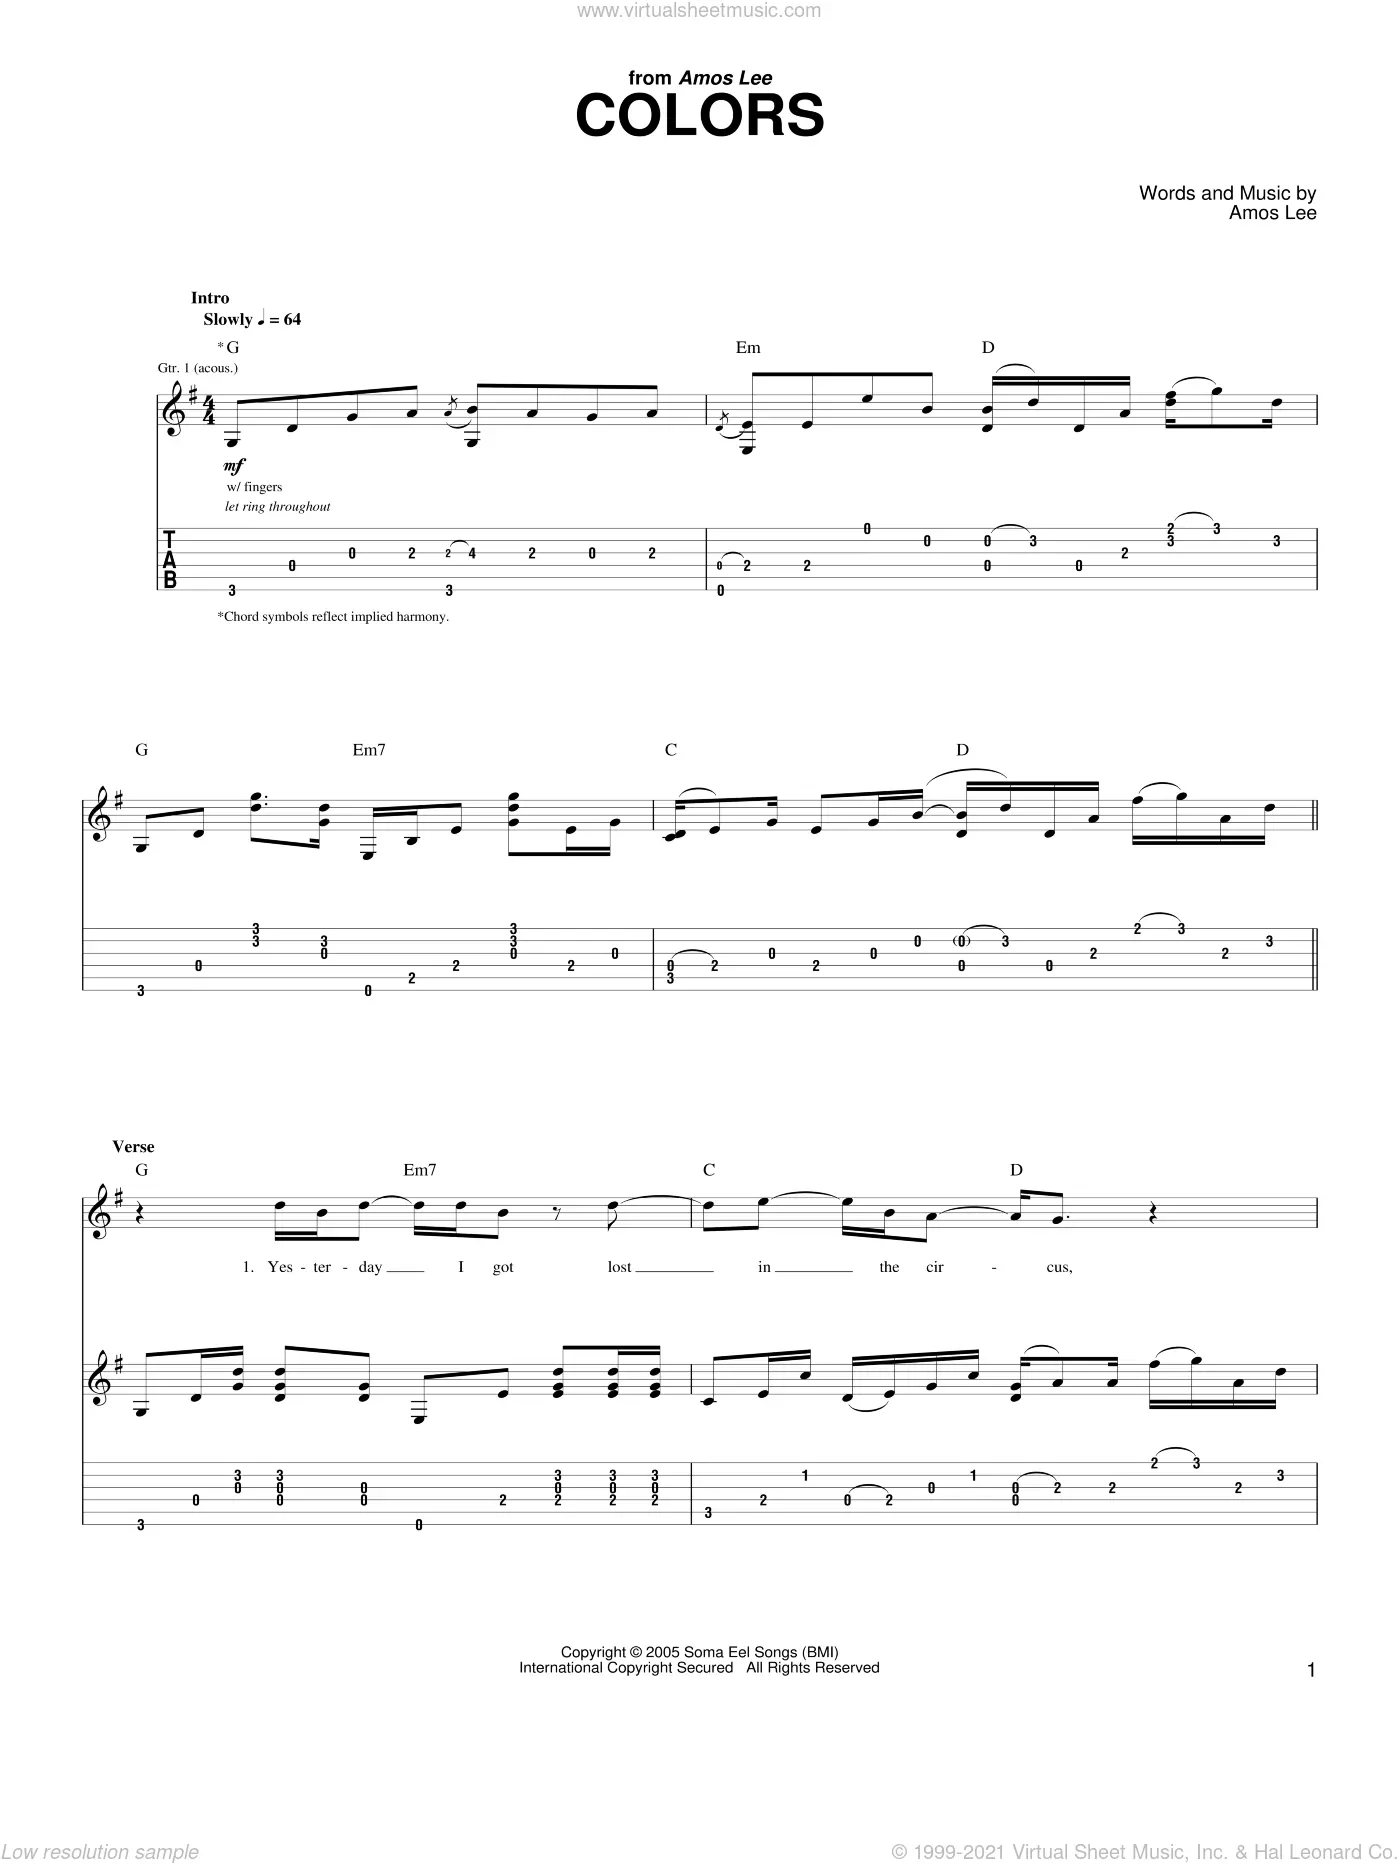 Amos-Lee Sheet Music to download and print